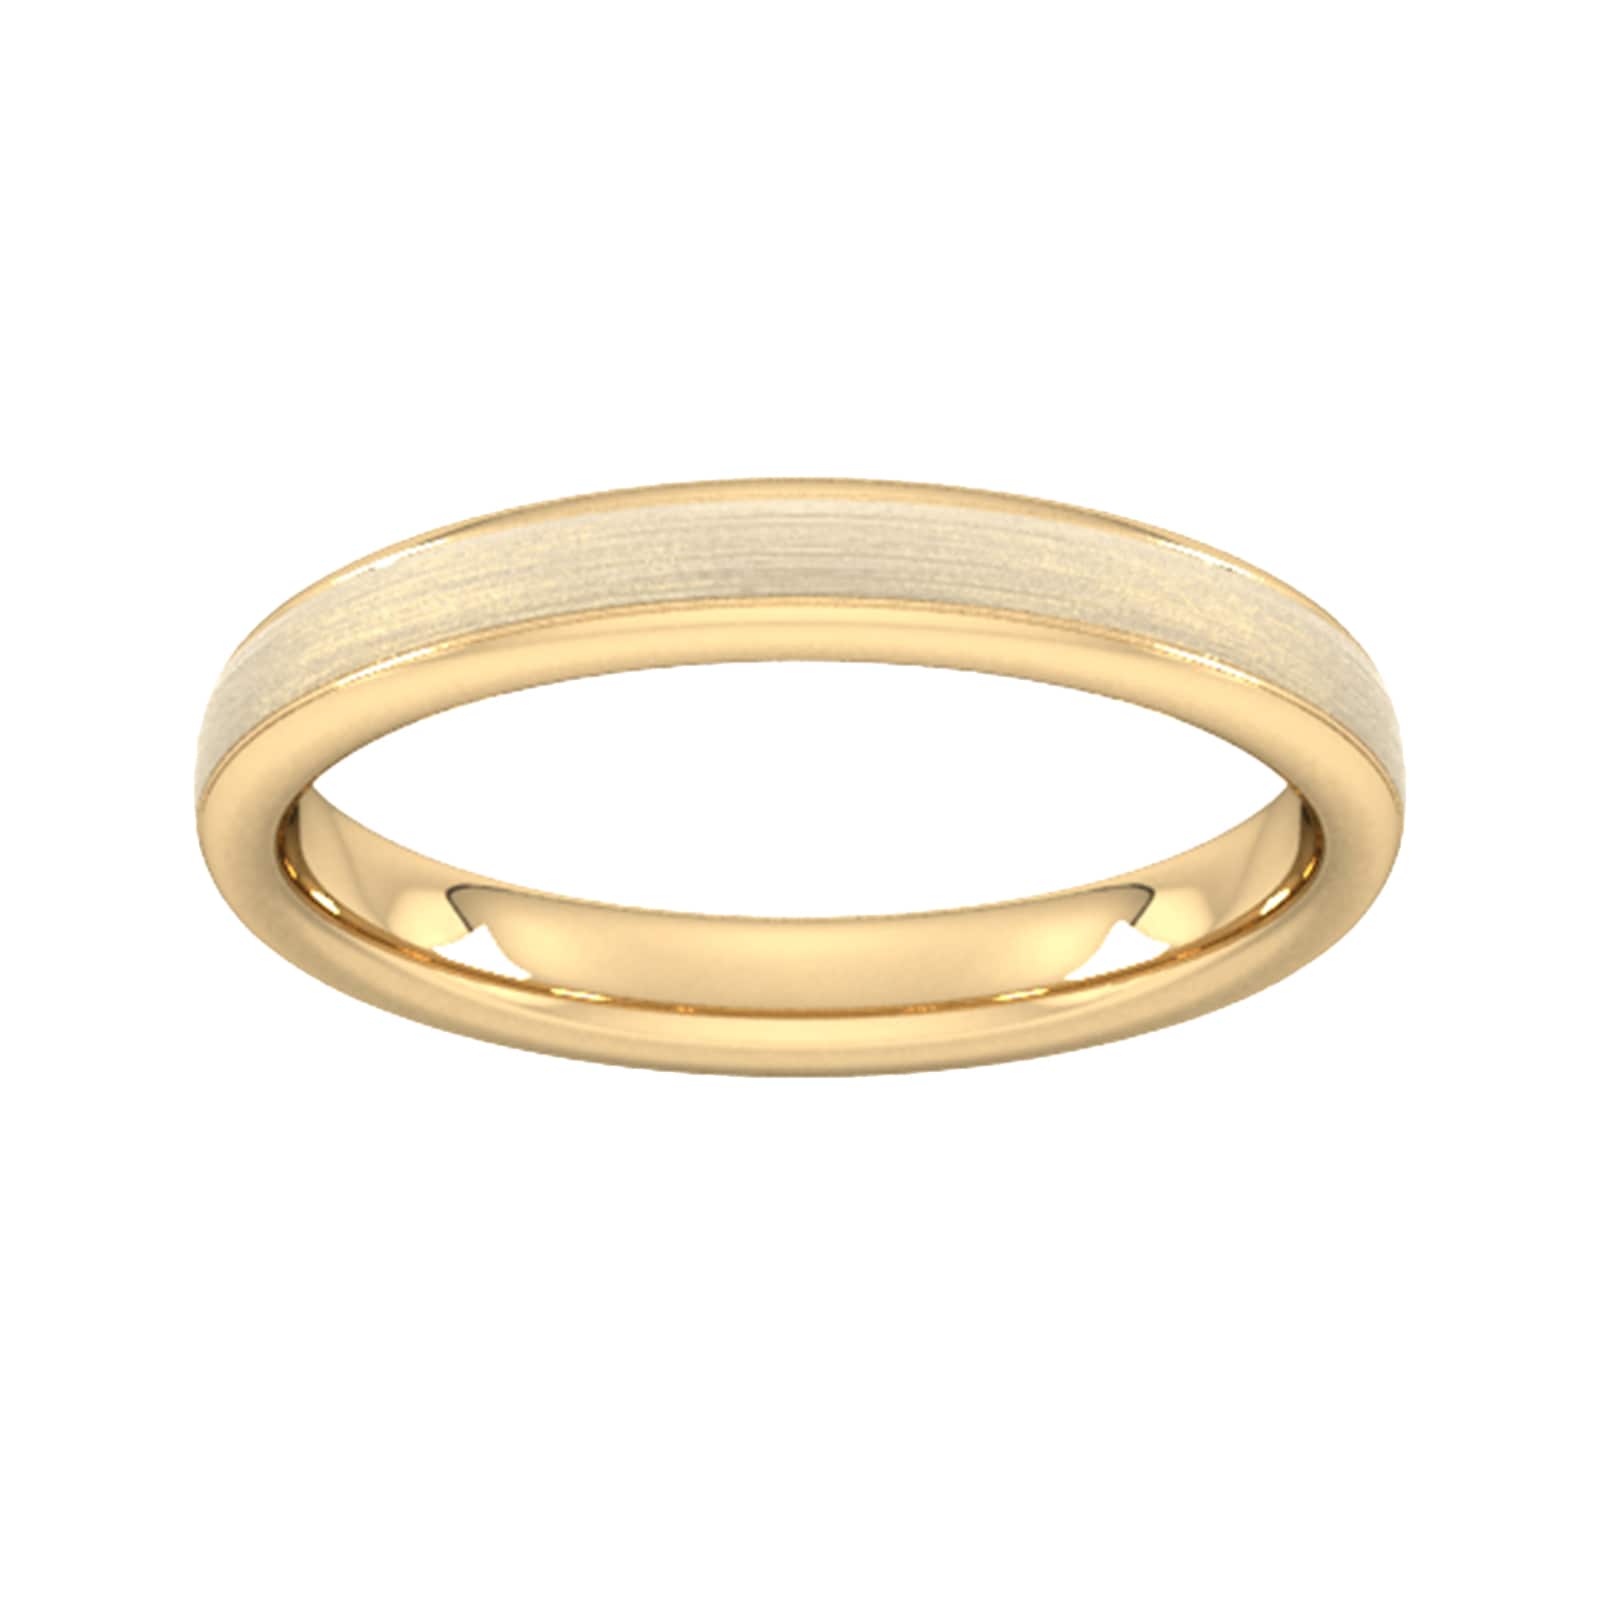 3mm Traditional Court Heavy Matt Centre With Grooves Wedding Ring In 18 Carat Yellow Gold - Ring Size V